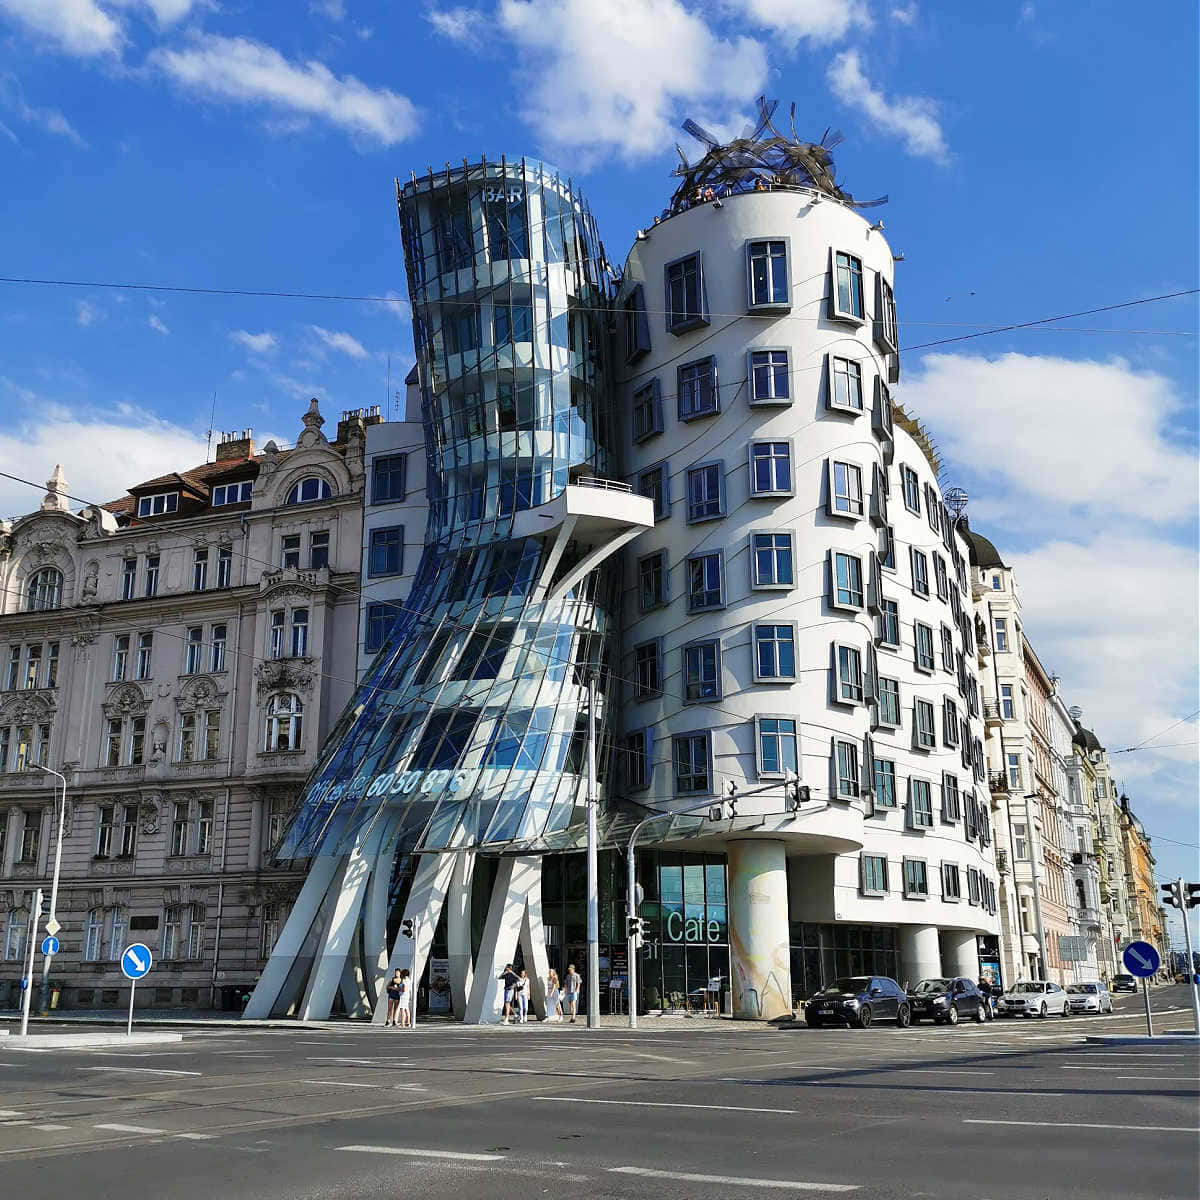 One-of-a-kind Dancing House In Prage Wallpaper